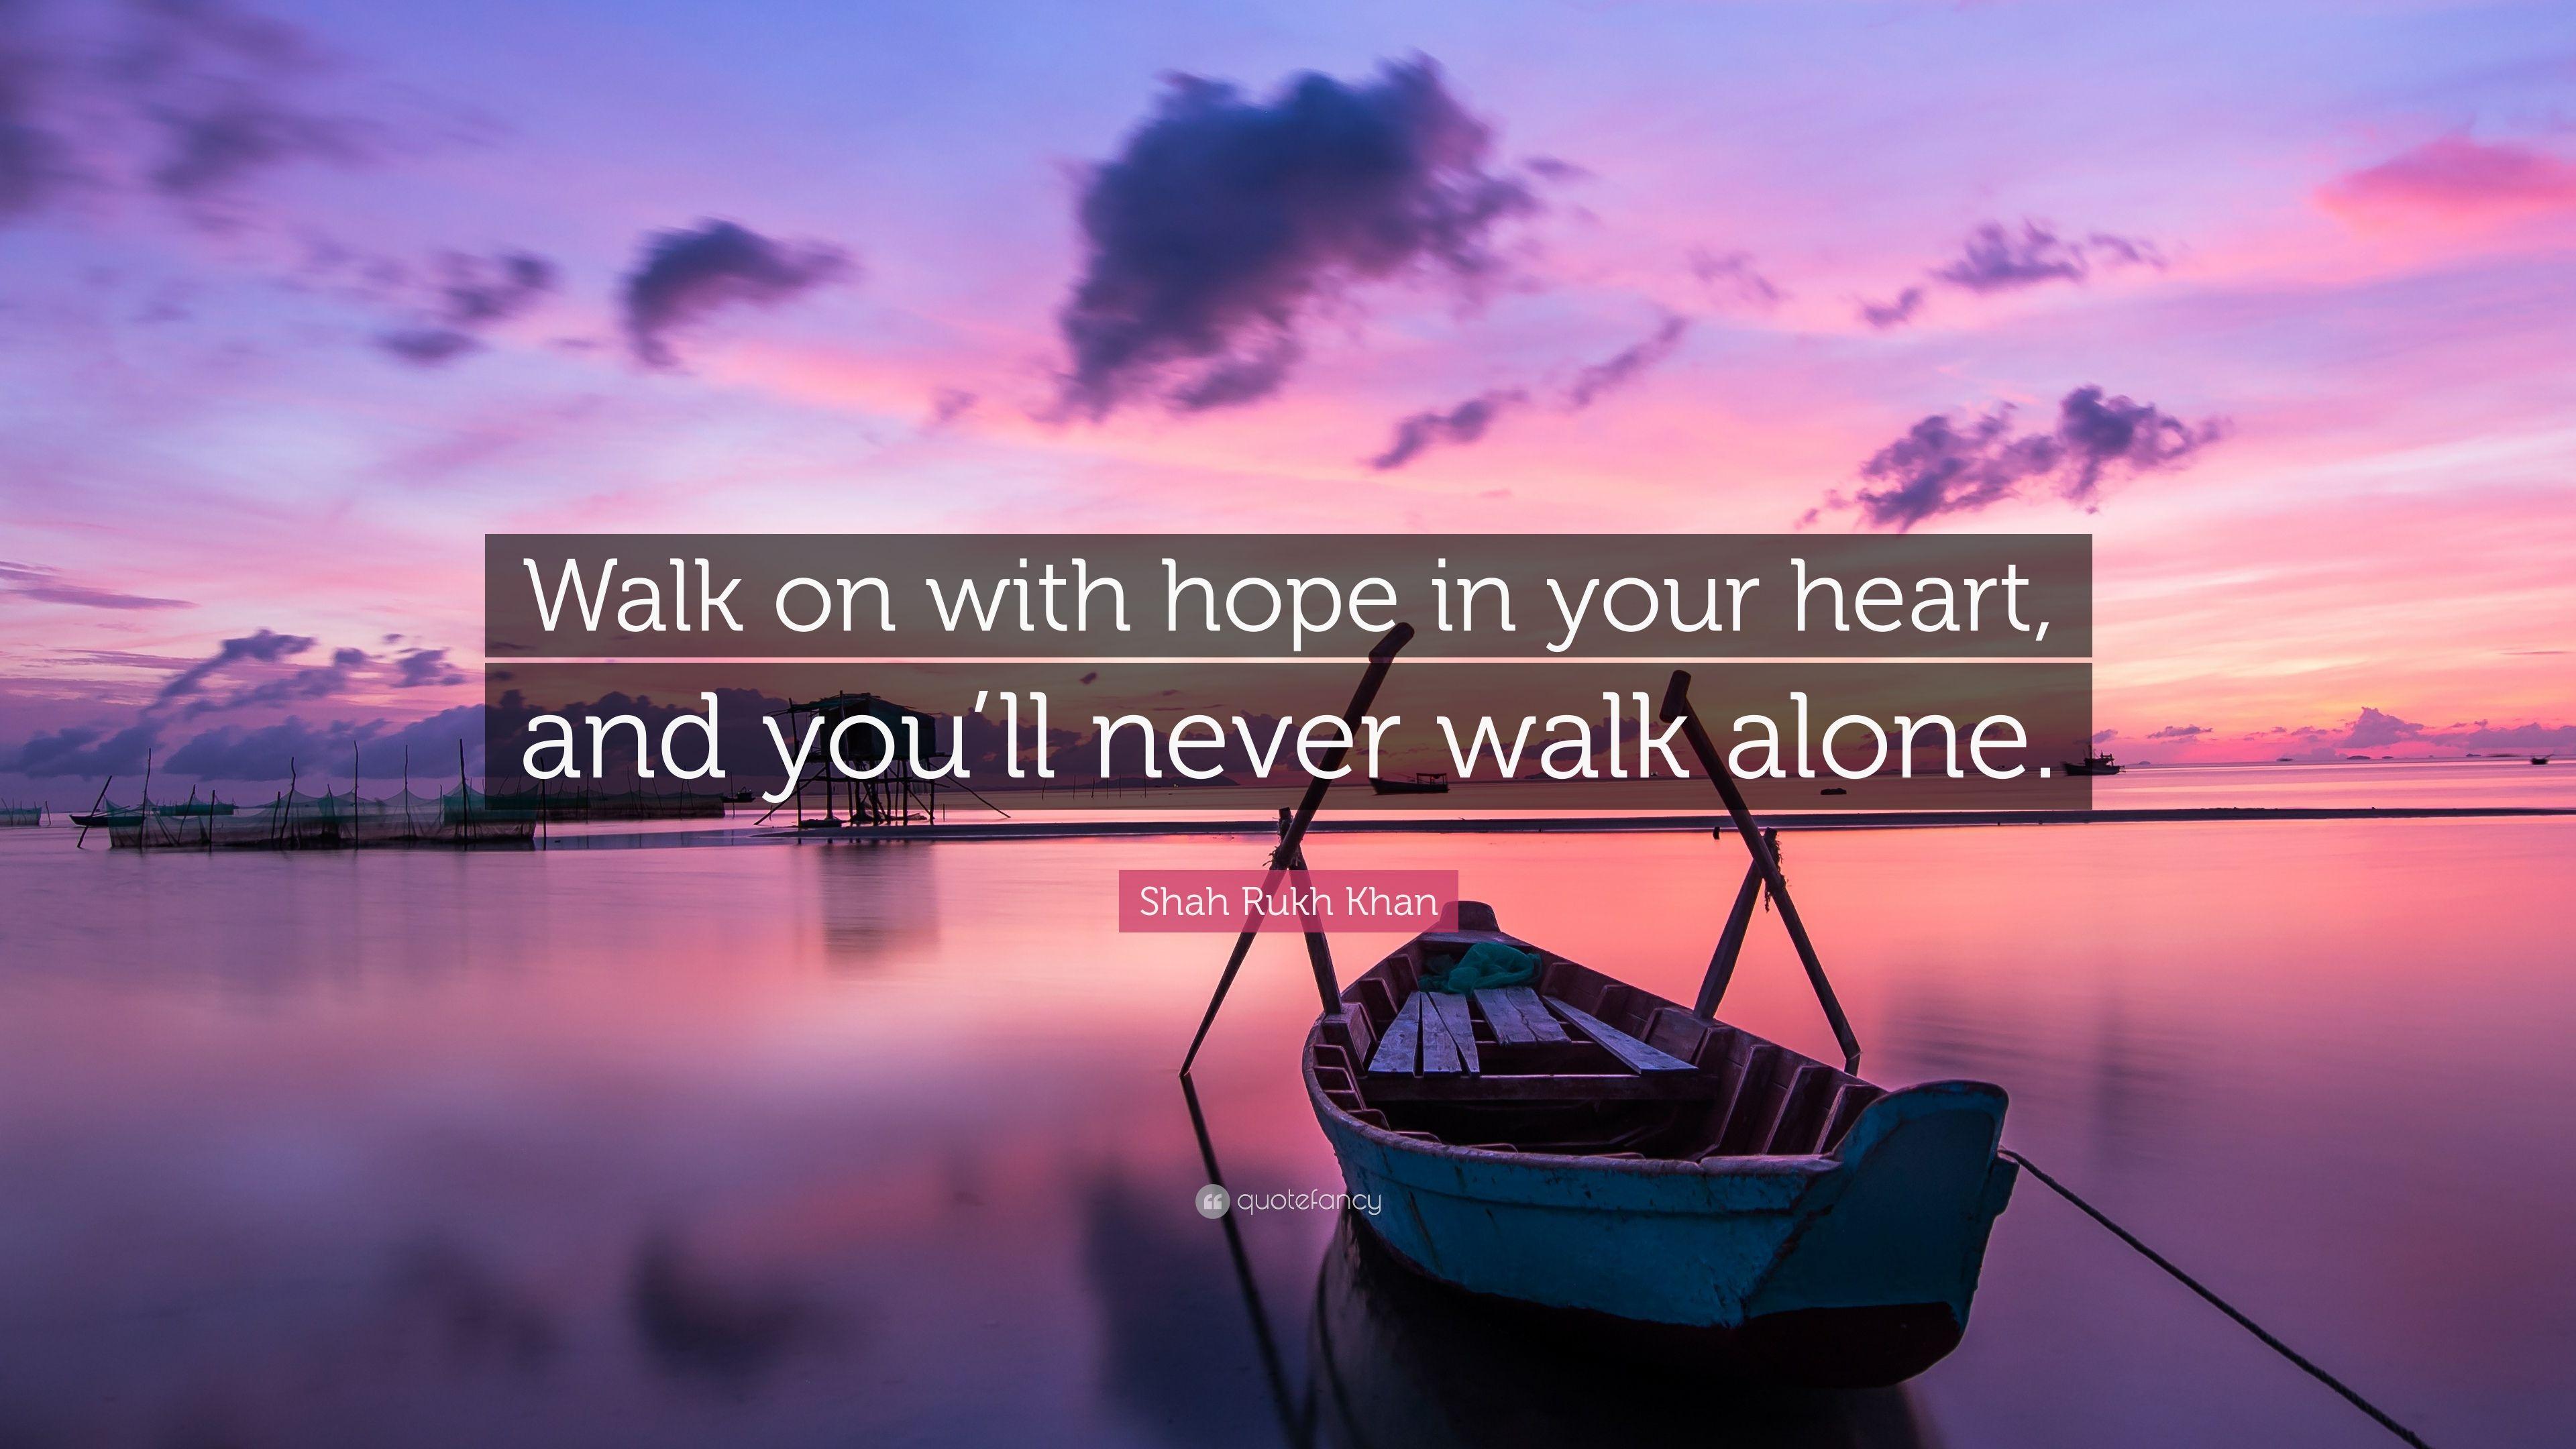 Shah Rukh Khan Quote: “Walk on with hope in your heart, and you'll